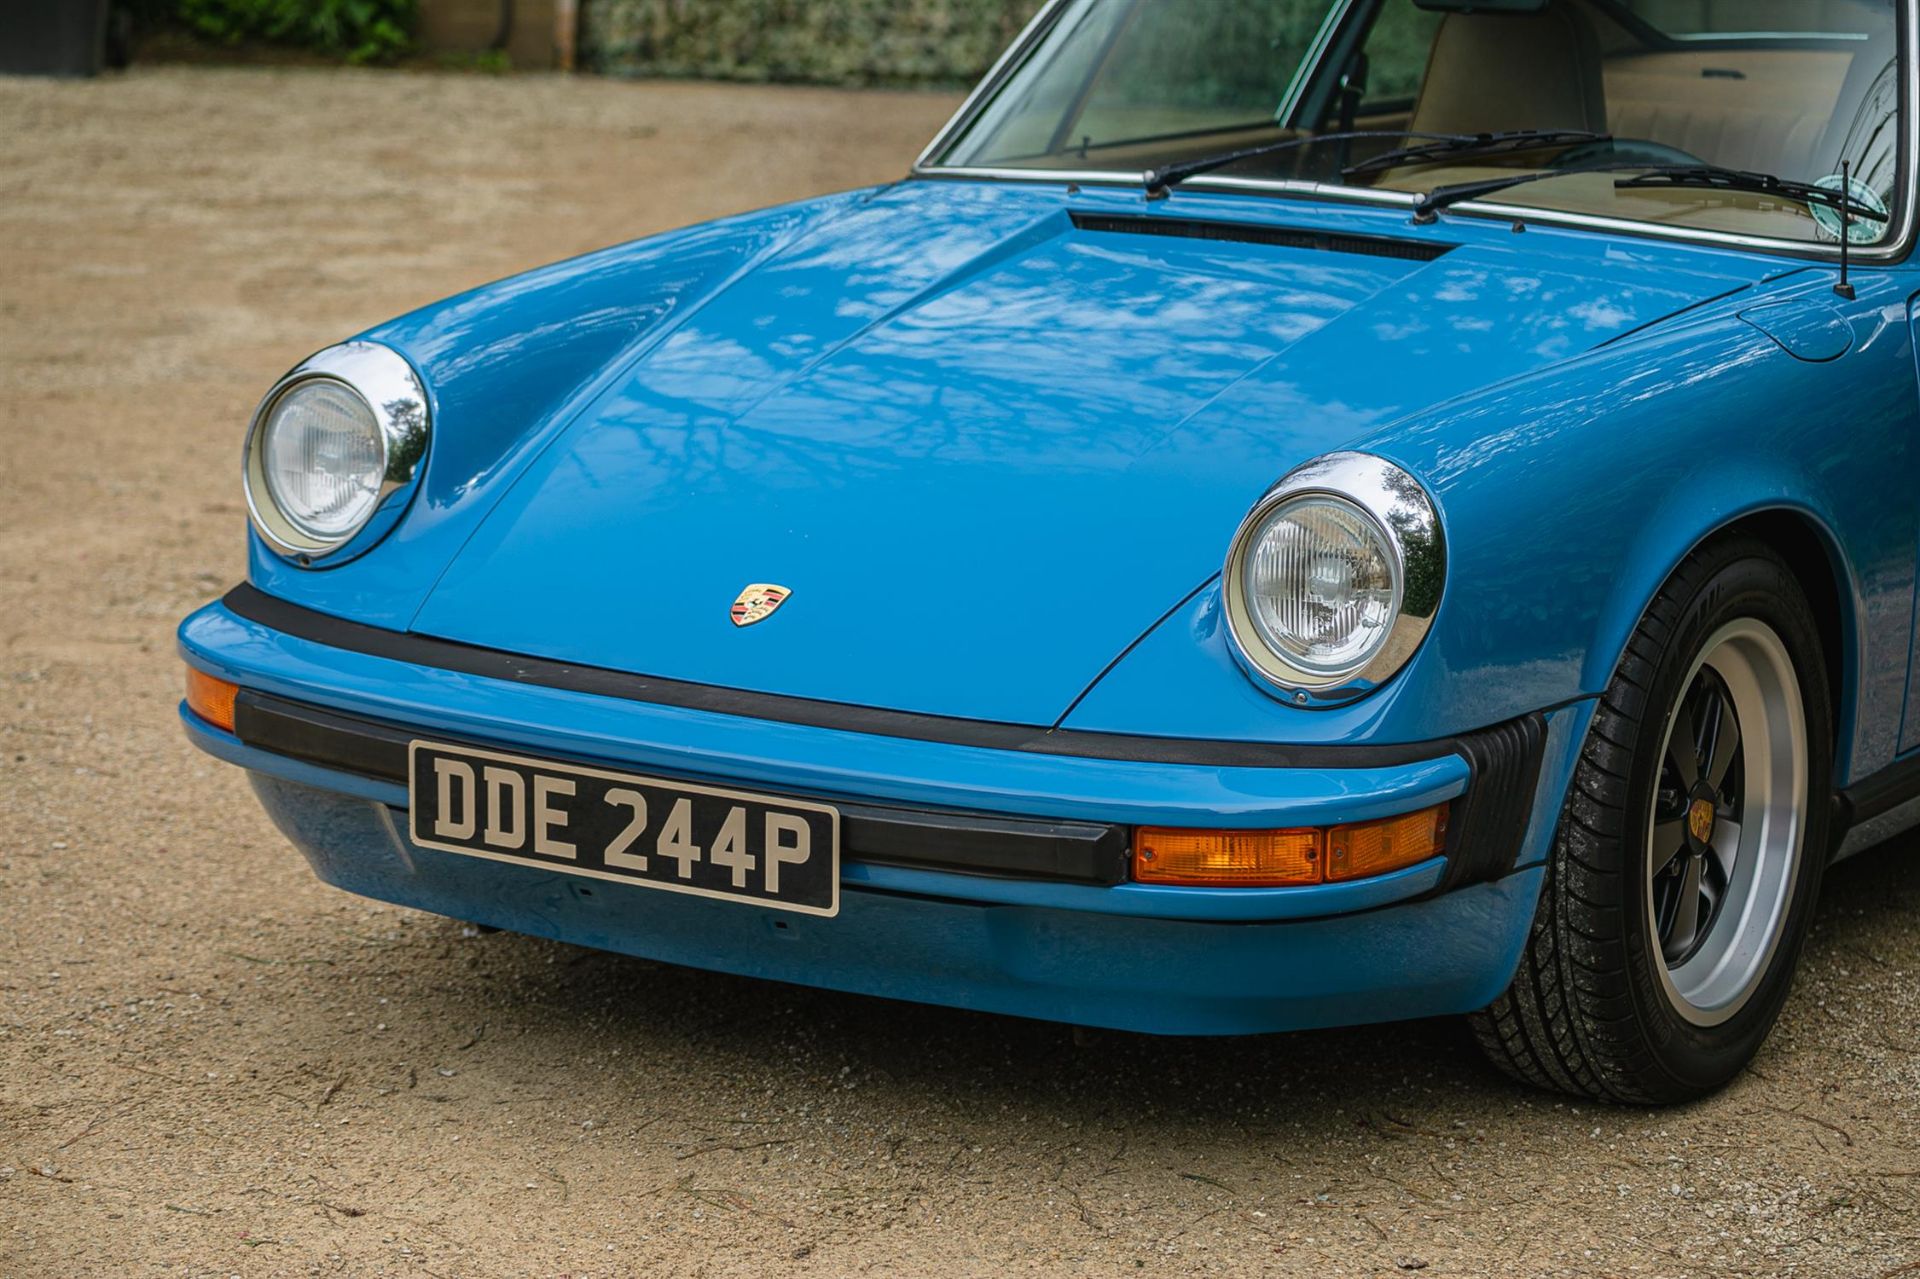 **Sold Pre-Sale**1976 Porsche 912E - Offered Directly From Mike Brewer - Image 10 of 10